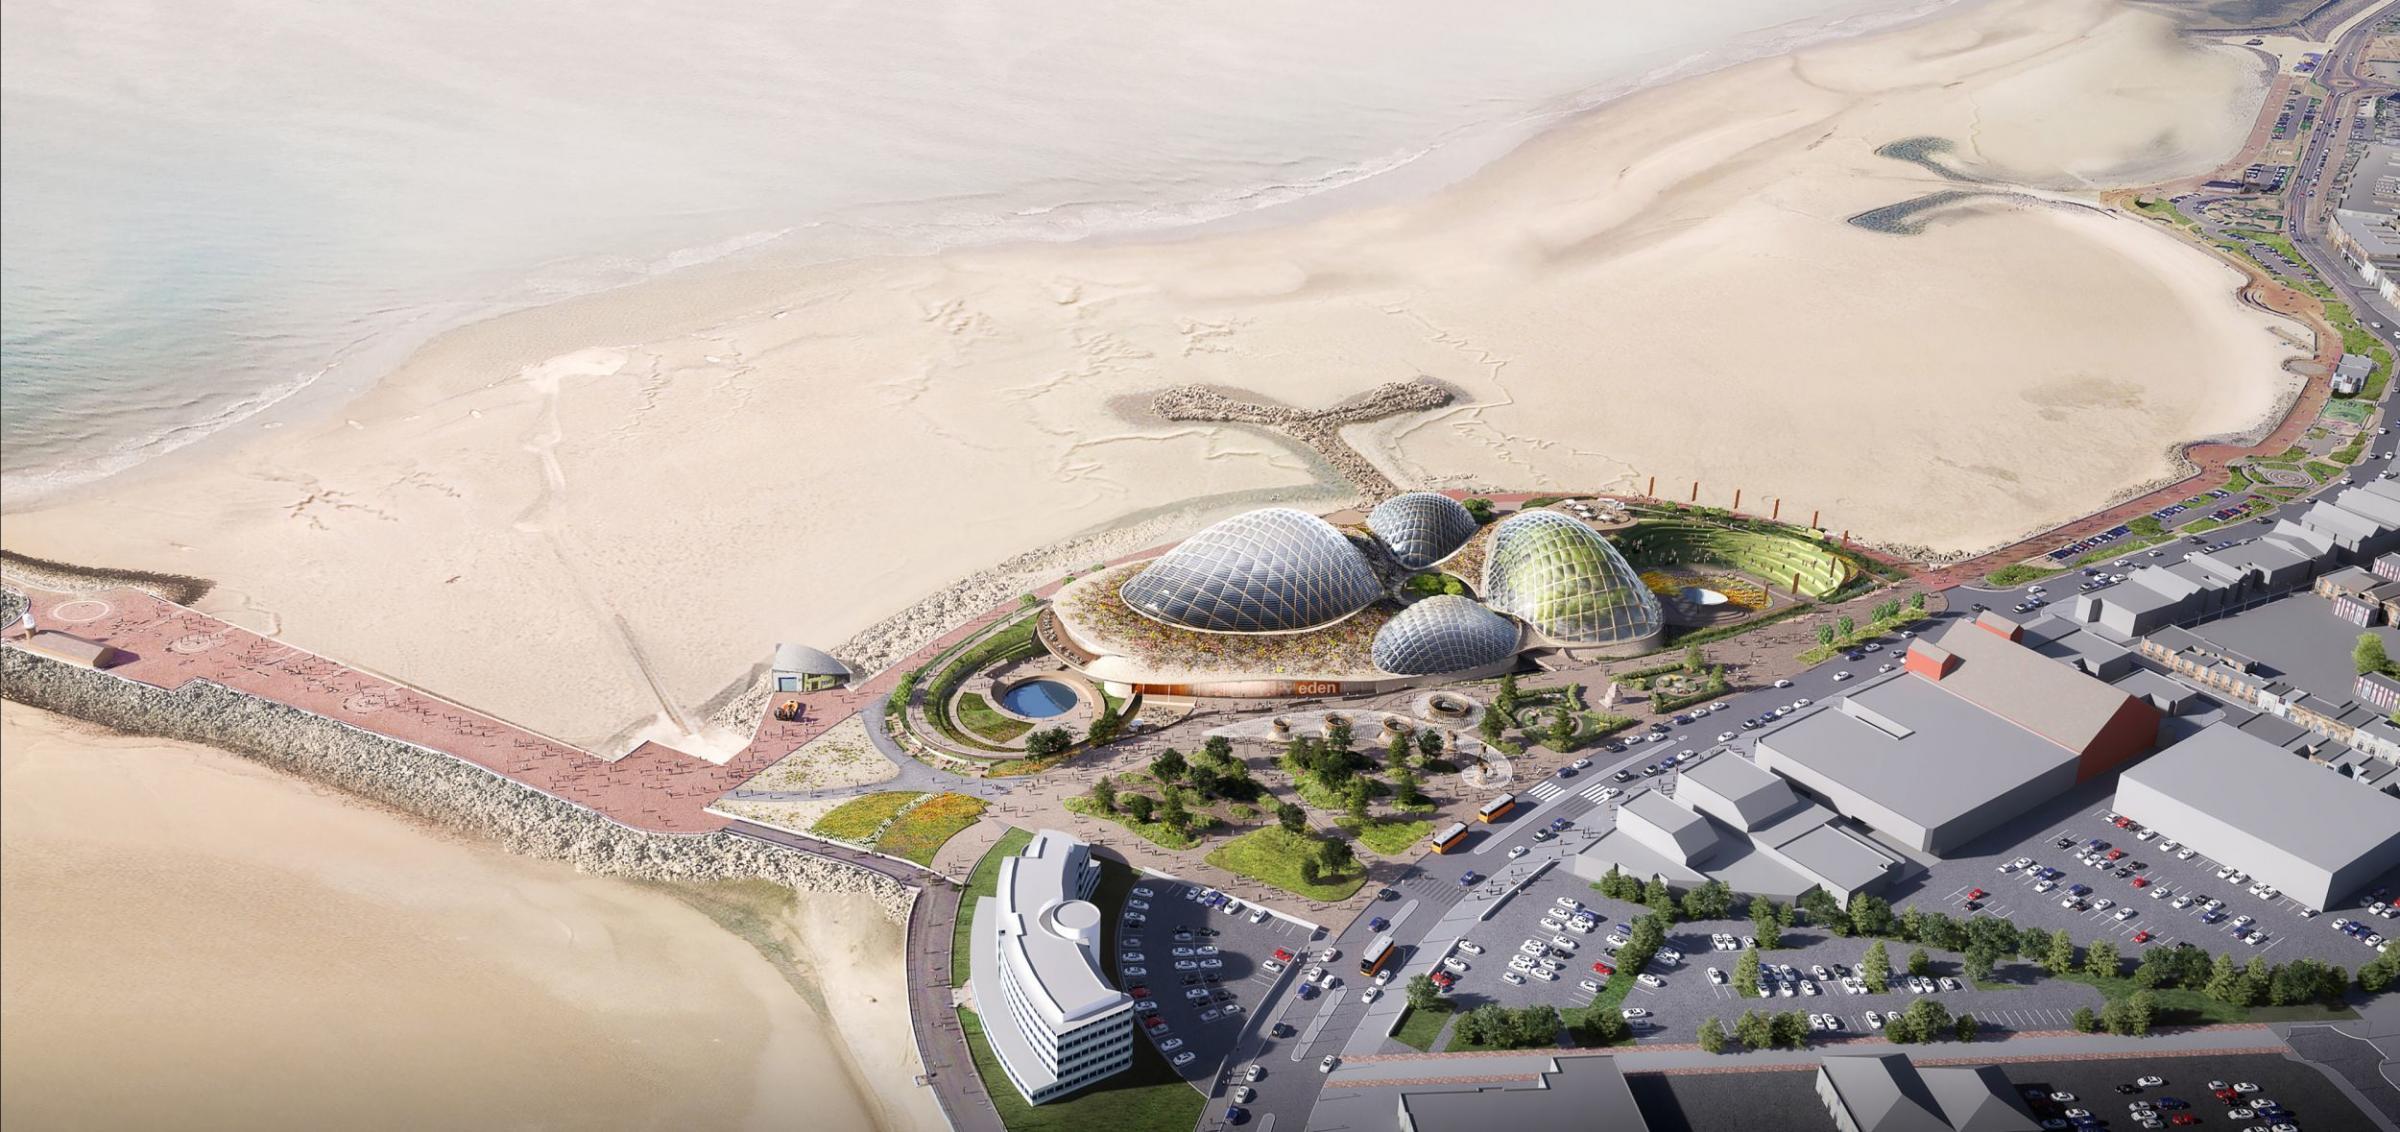 Eden Project North will be set next to the beach in Morecambe